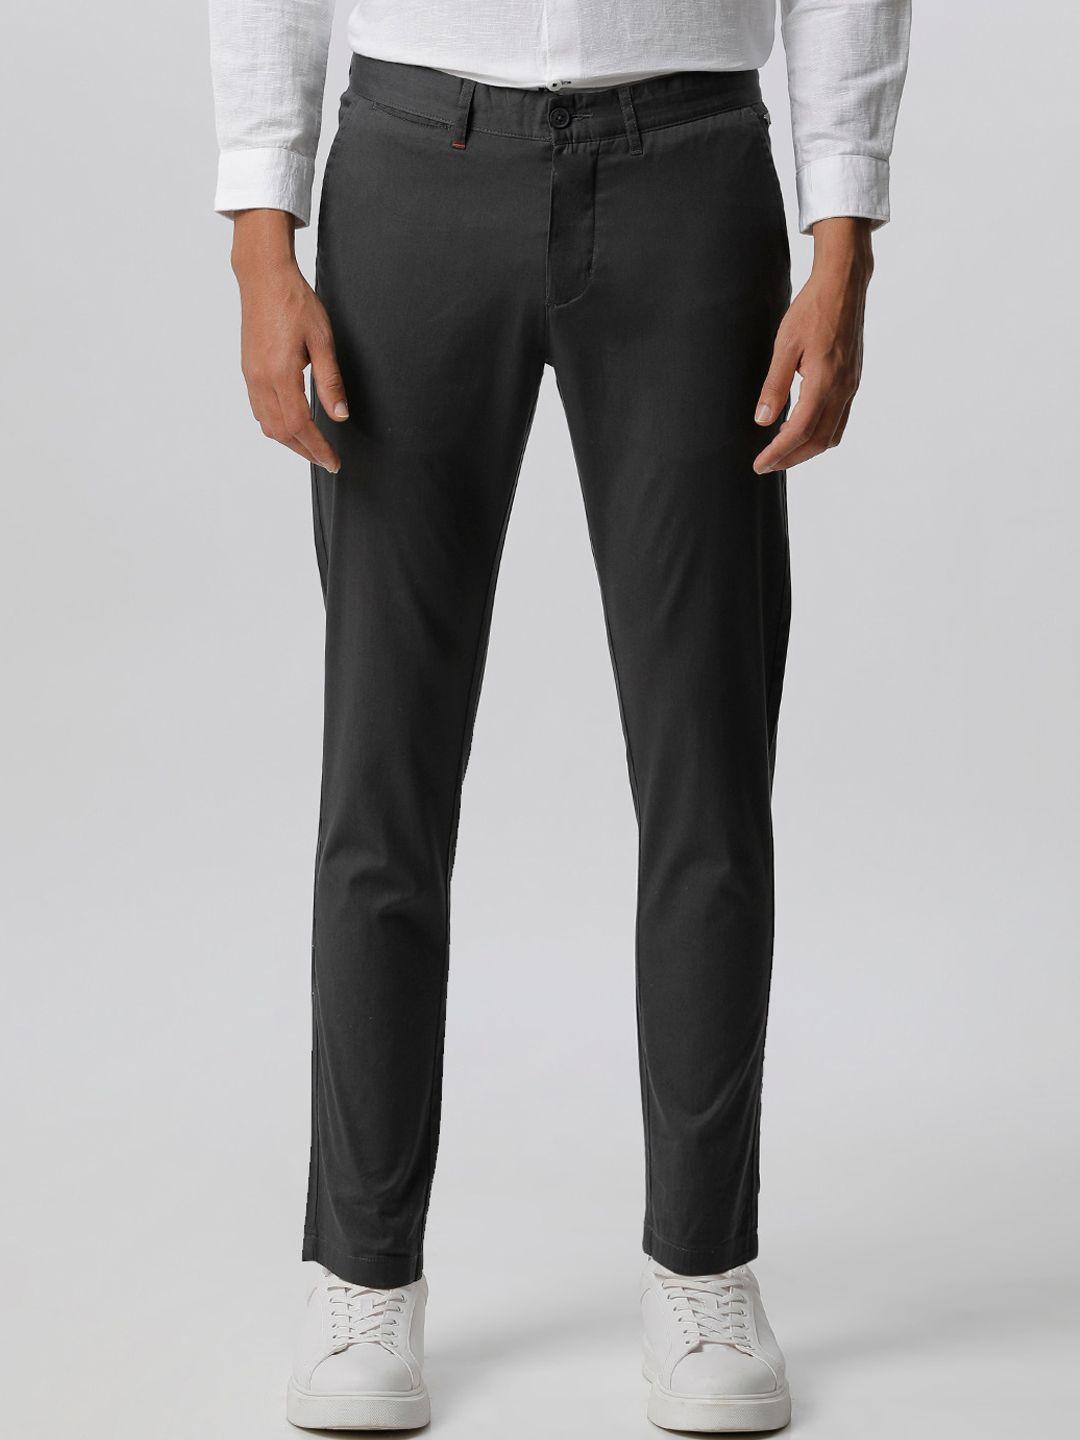 the-bear-house-men-grey-tapered-fit-trousers